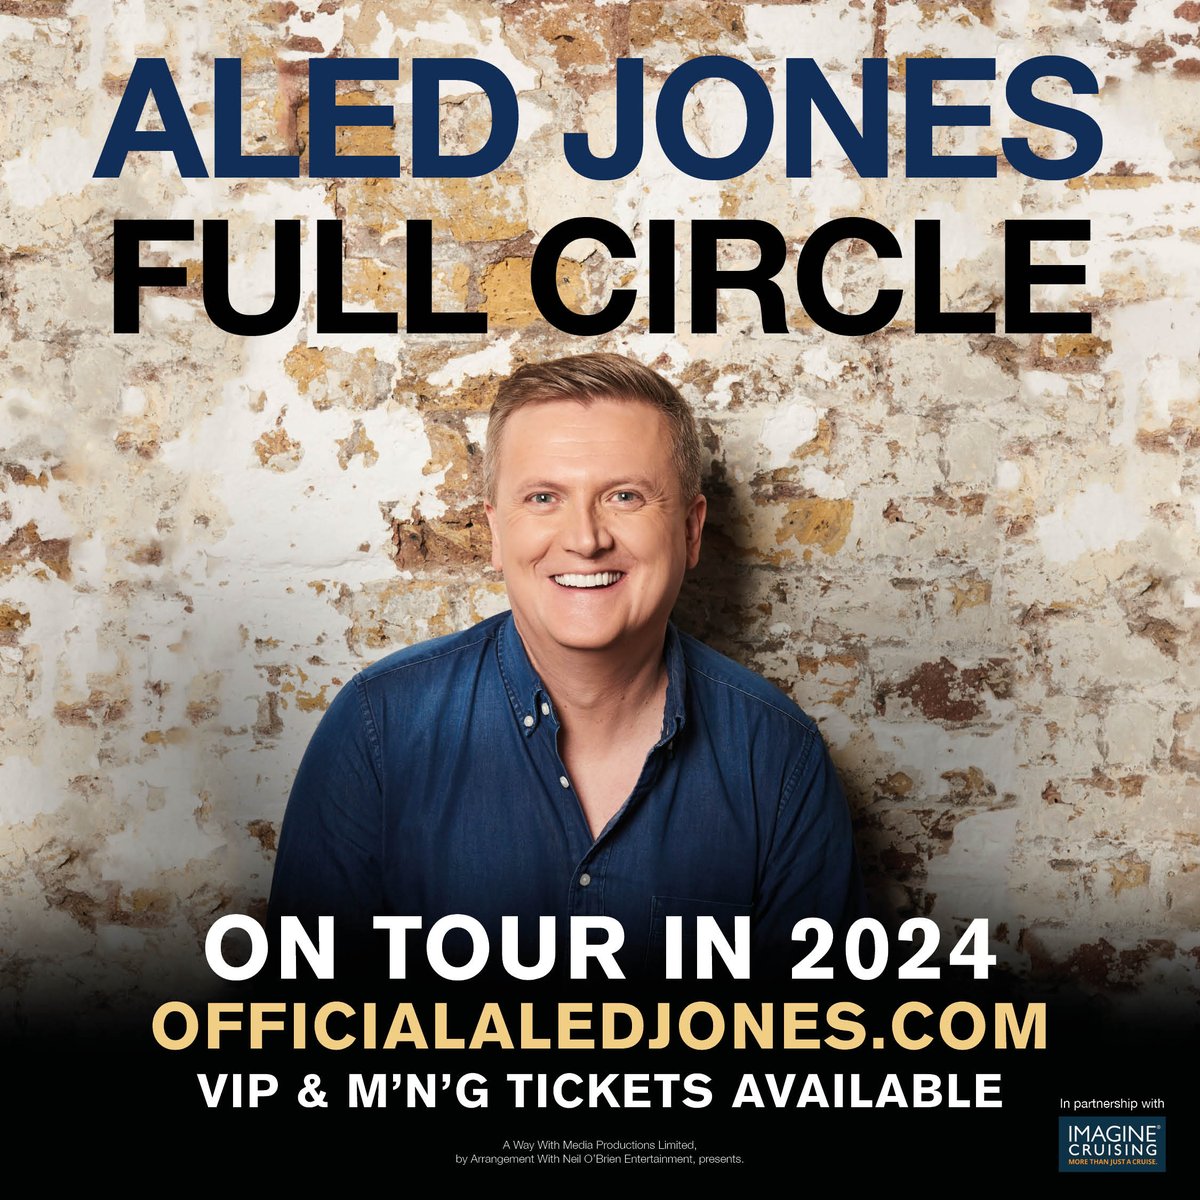 Aled Jones: Full Circle - Sat 28th Sept - 7:30pm

Prepare to hear @realaled as you’ve never heard him before.

Book Now 🎟️: bit.ly/4aaVu9Y

#WeSupportNTR #HaveYouGotYourTicketsYet #HereforCulture